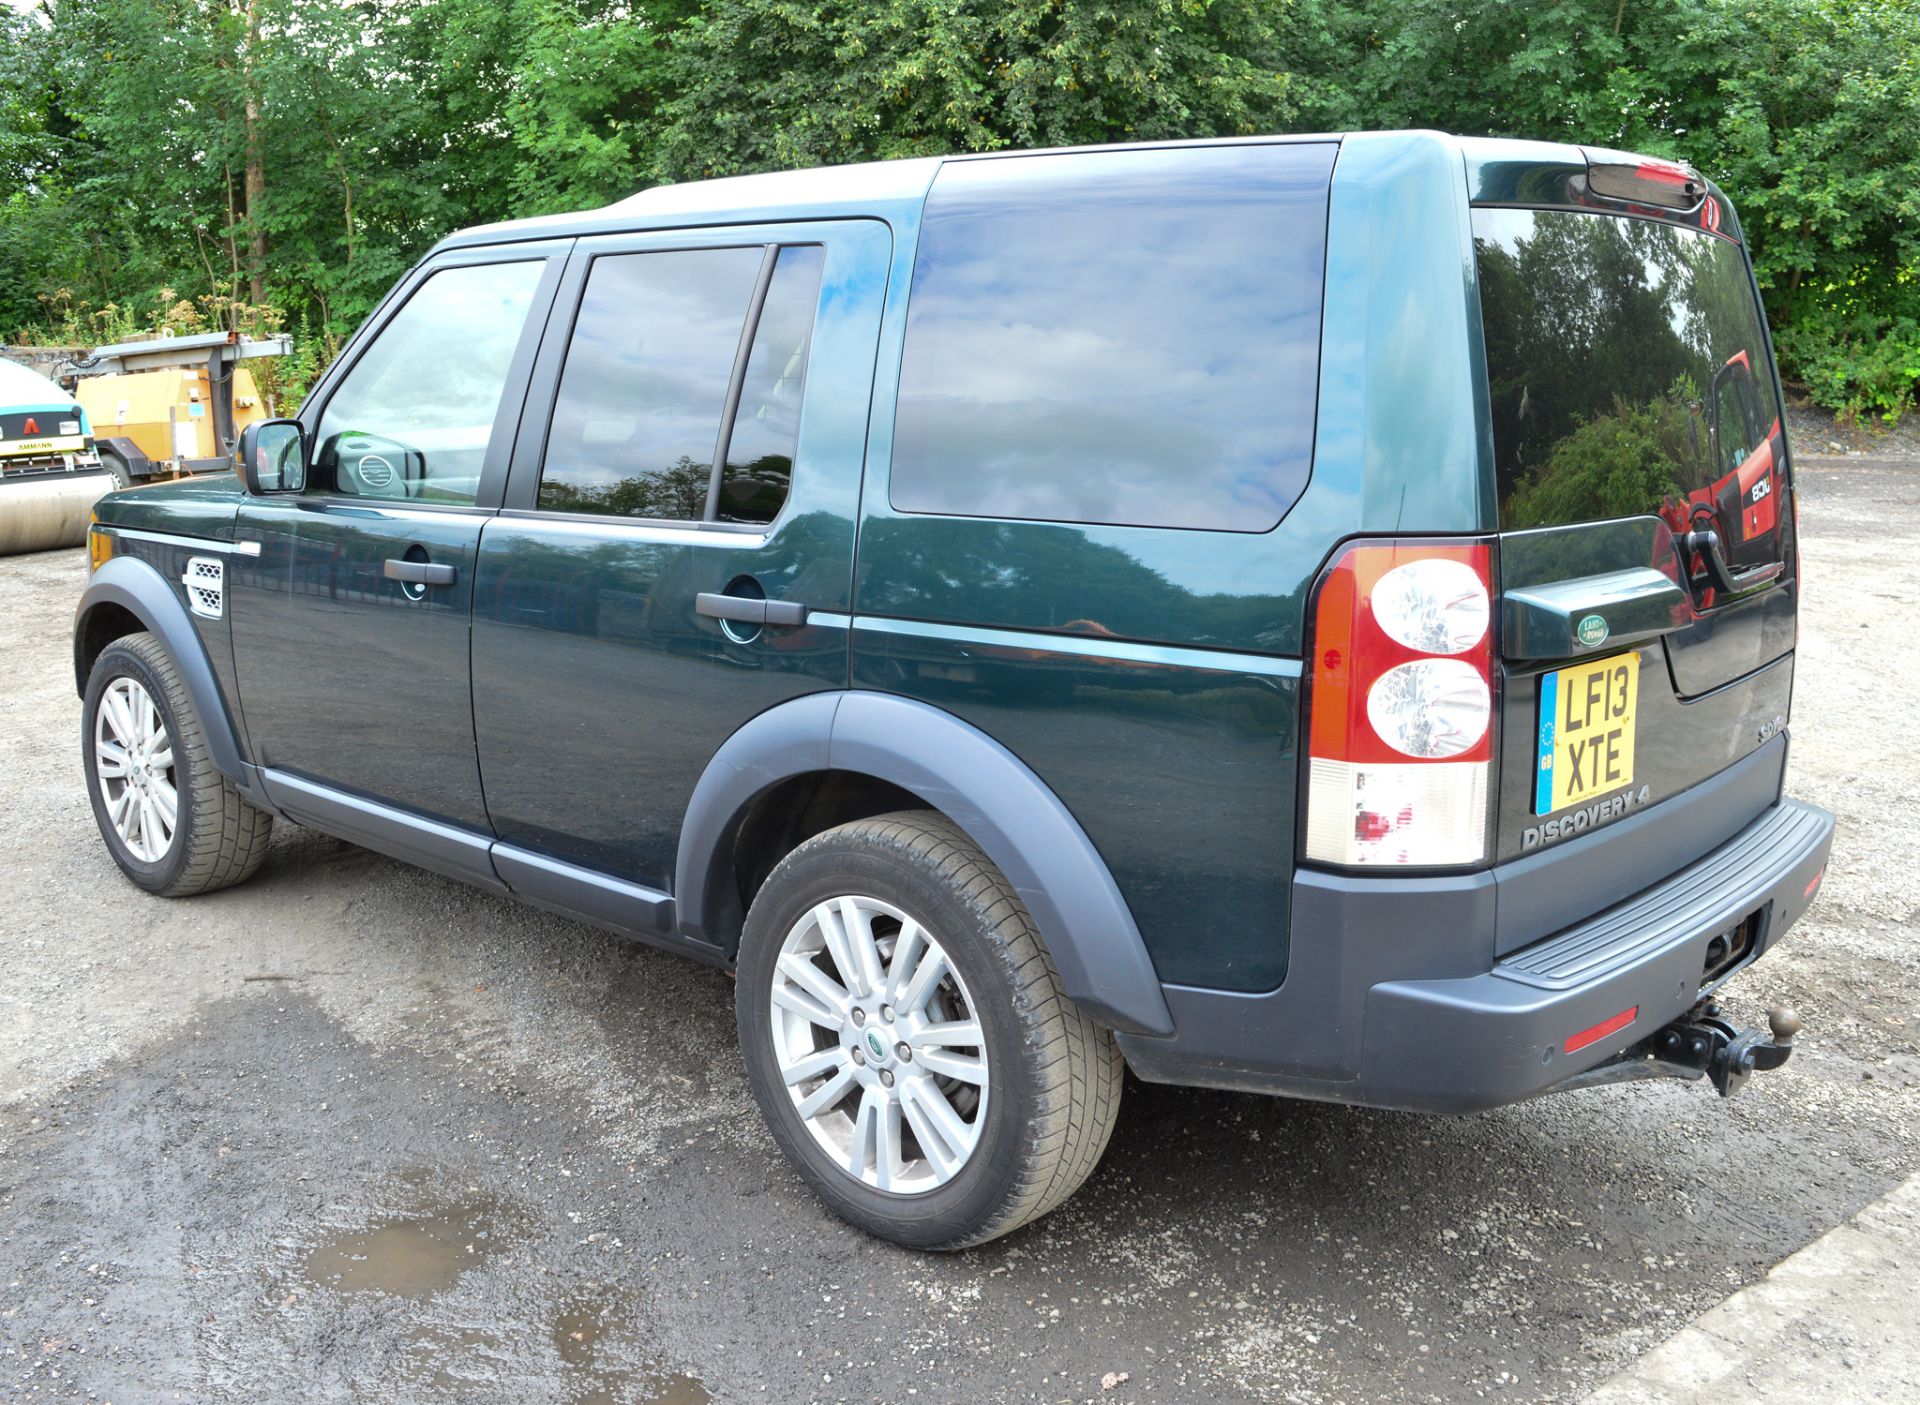 Land Rover Discovery 4 SDV6 Auto 4x4 Commercial utility vehicle Registration Number: LF13 XTE Date - Image 3 of 10